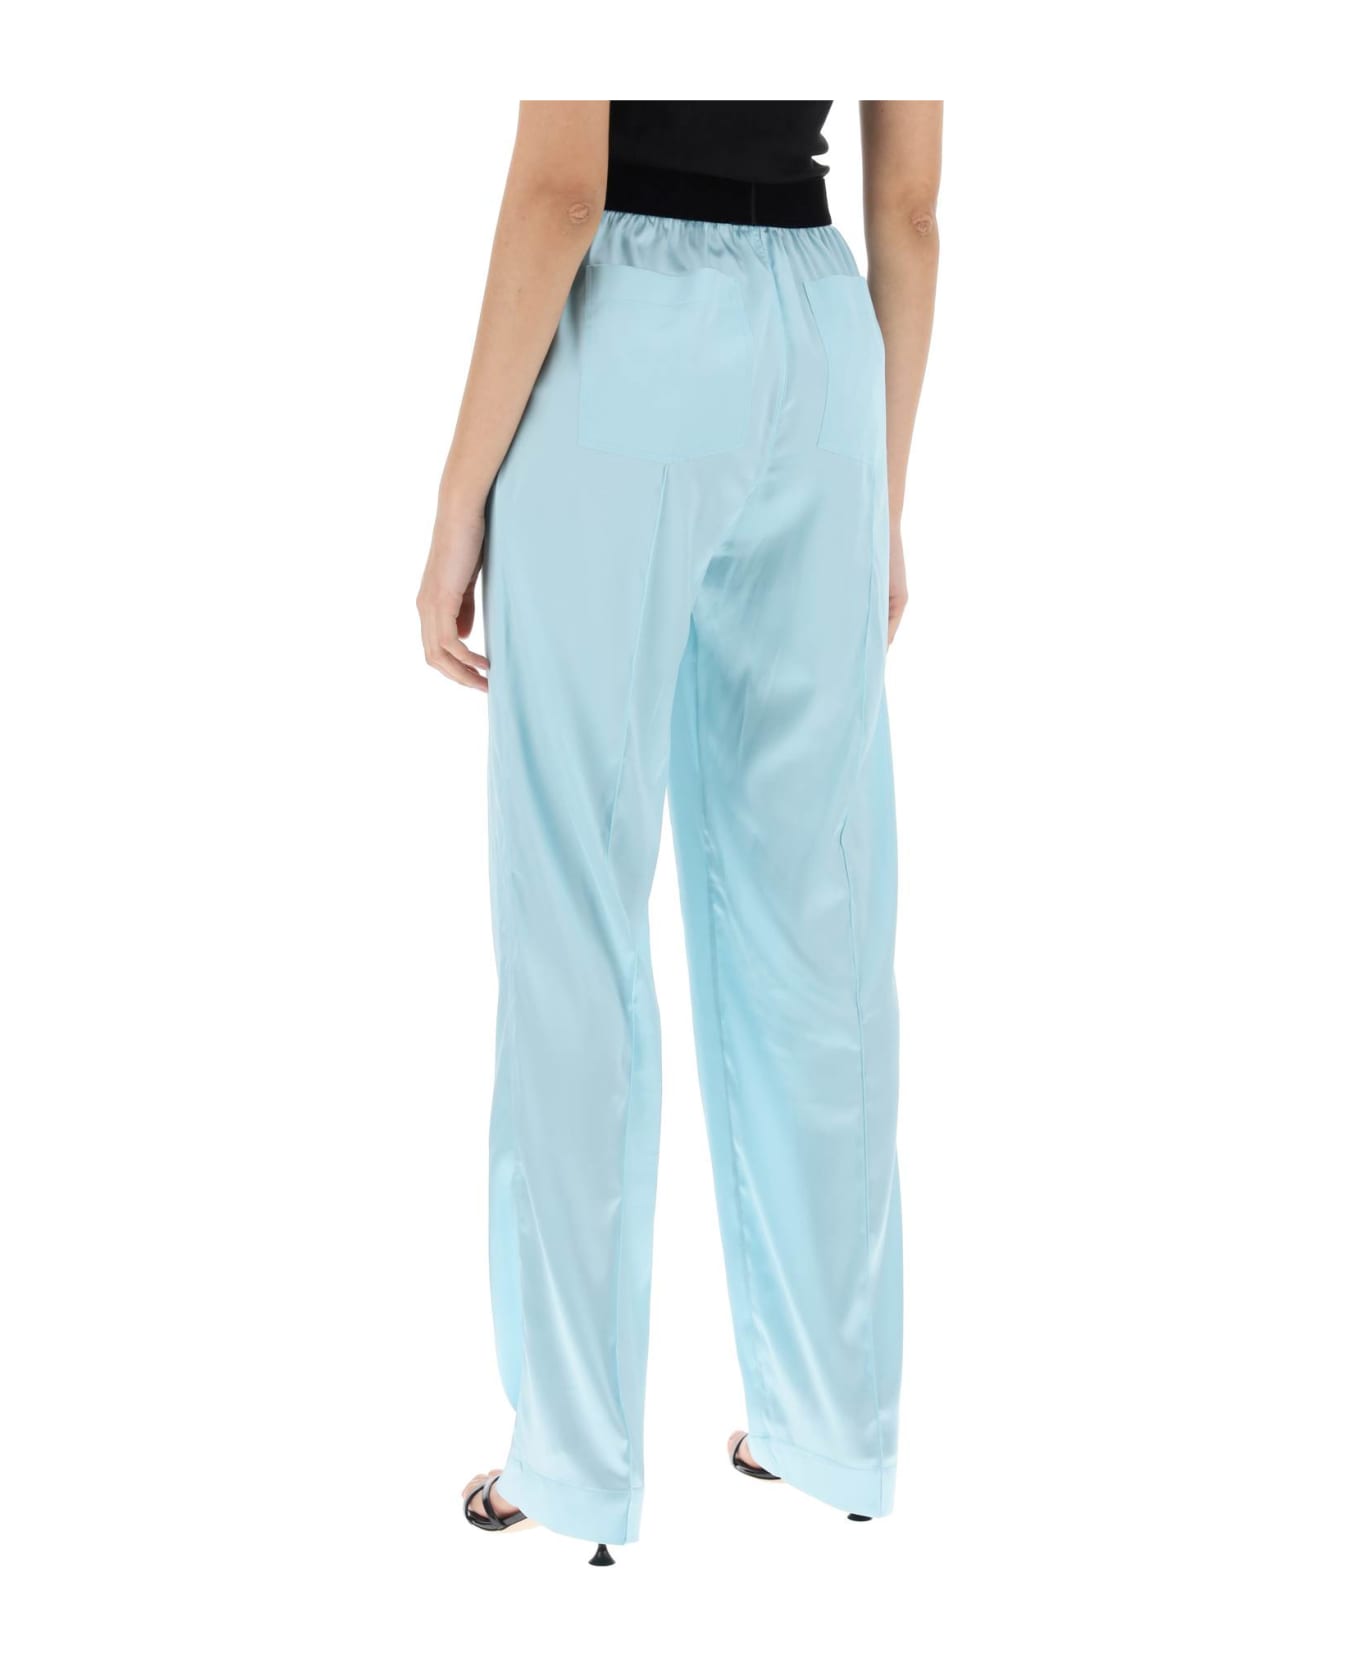 Tom Ford Silk Trousers - Light Blue ボトムス